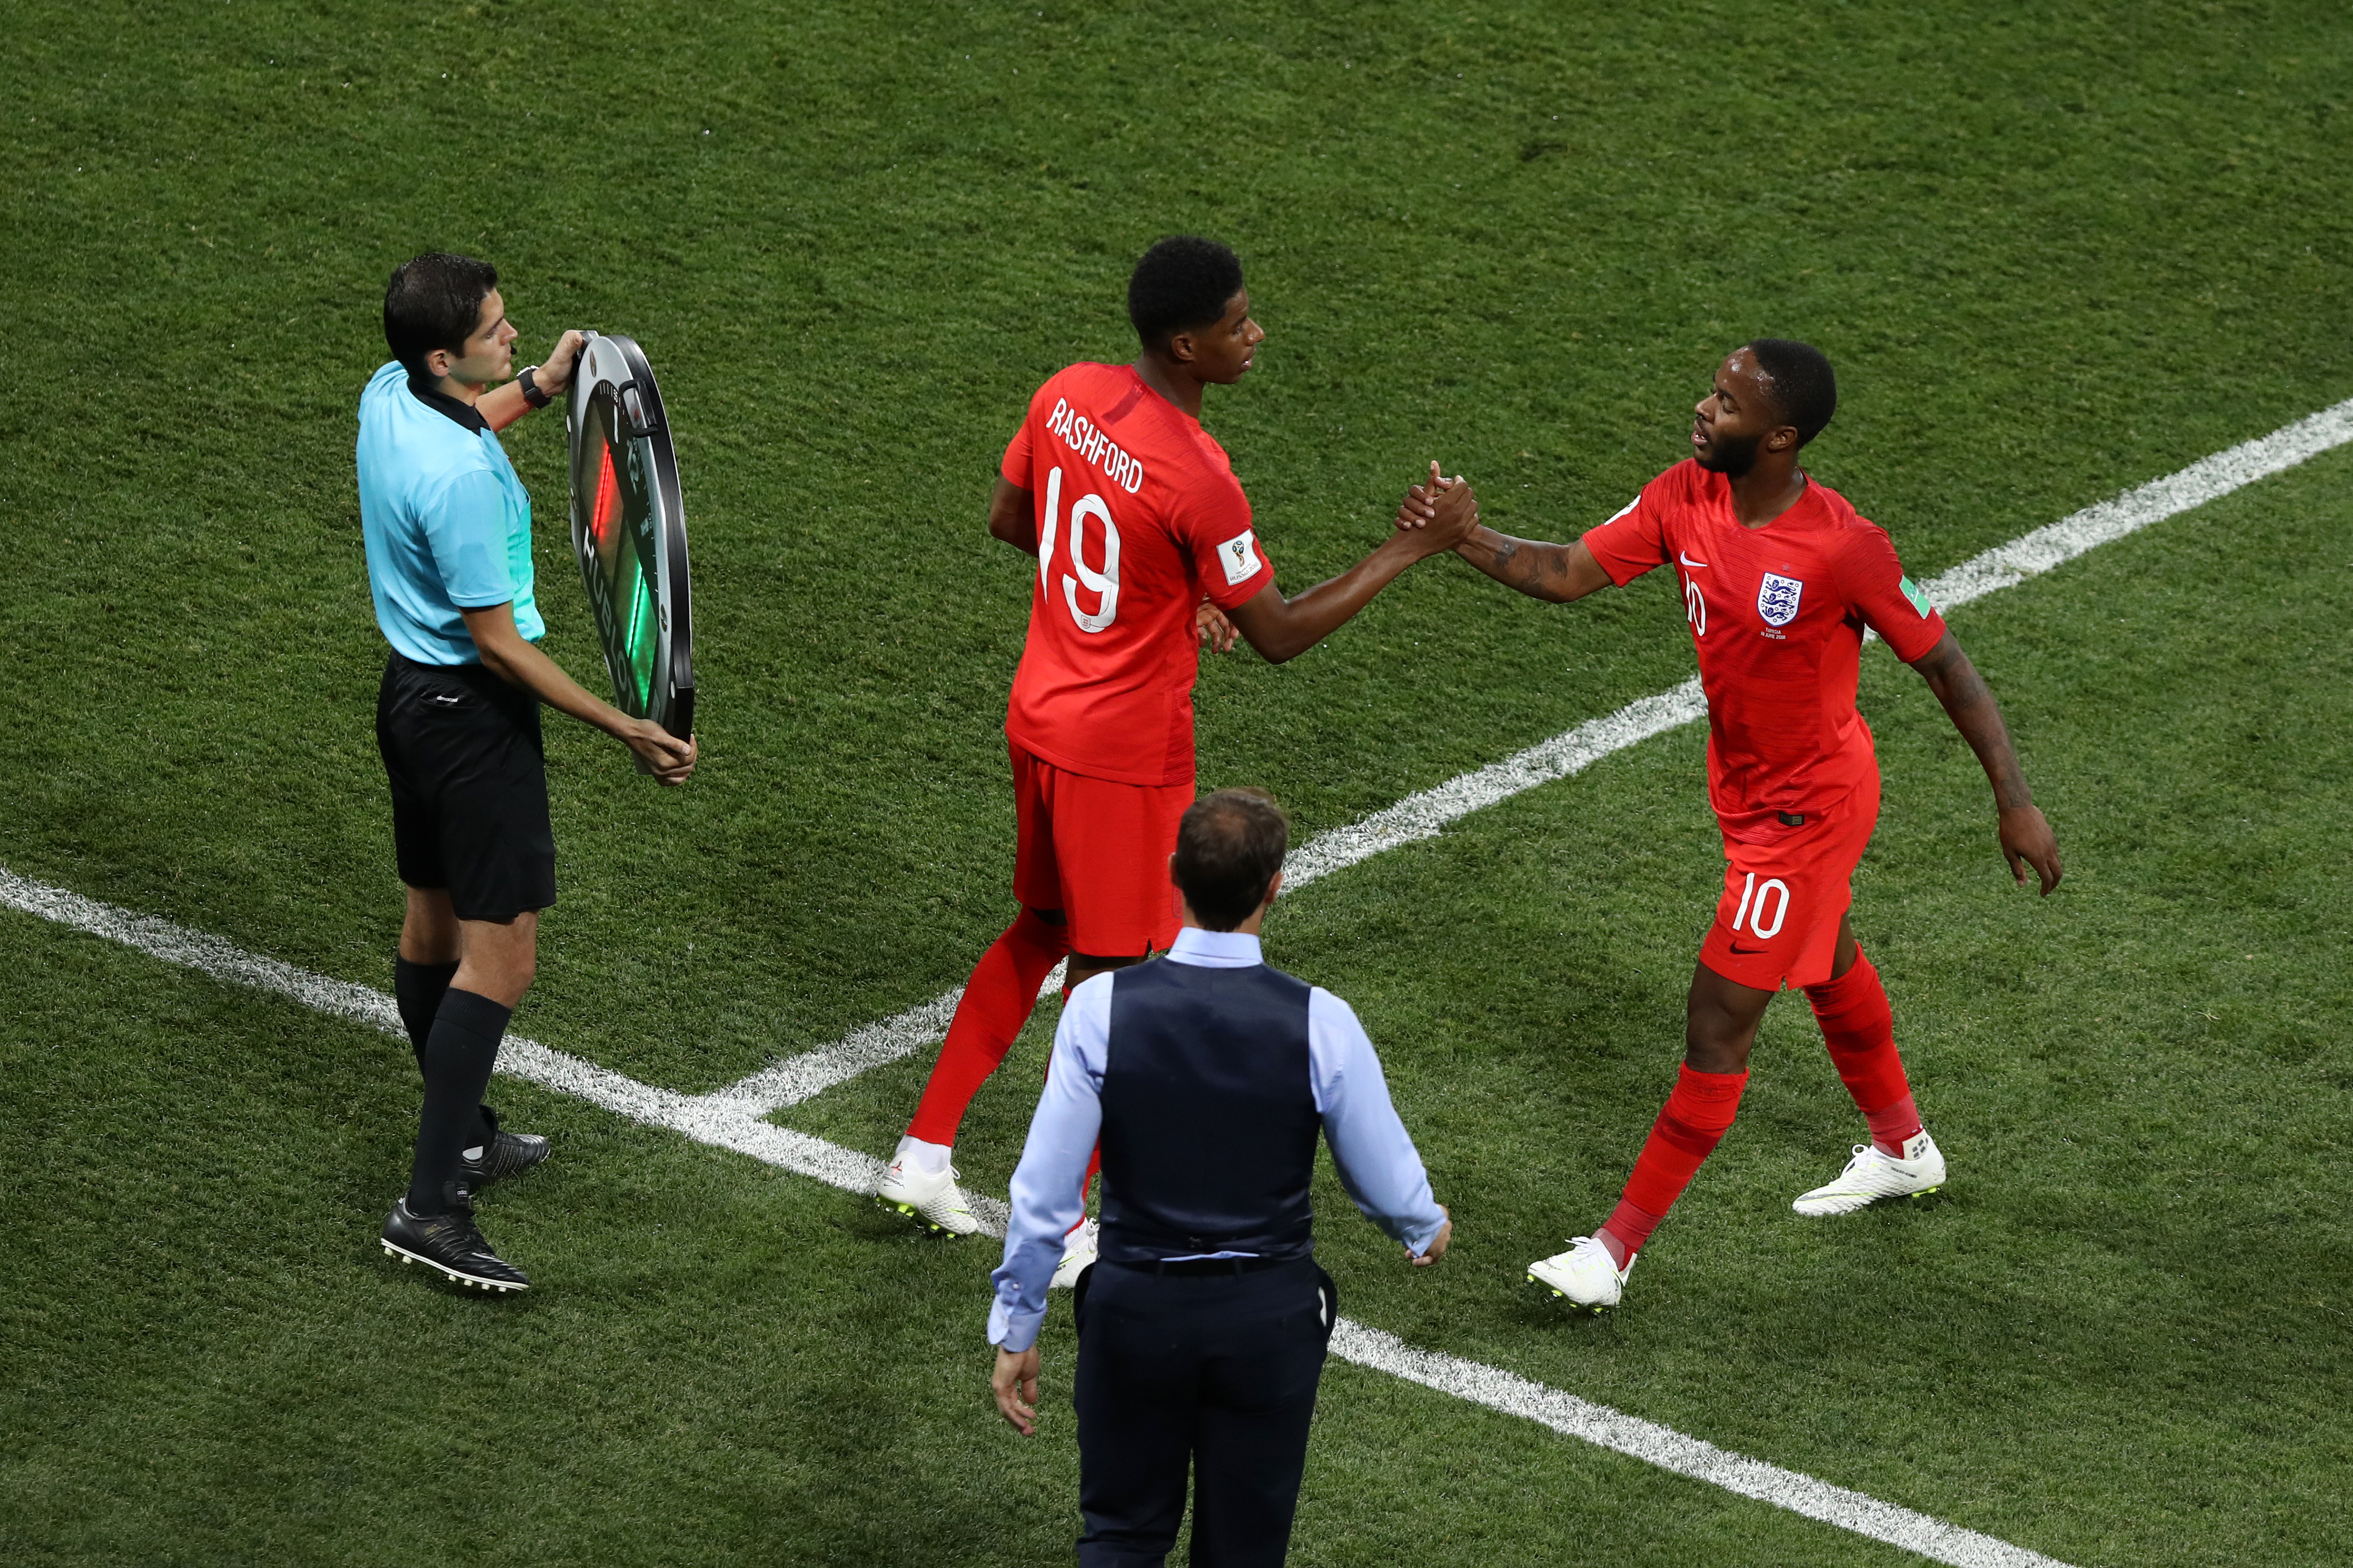 VOLGOGRAD, RUSSIA - JUNE 18:  Raheem Sterling of England greets Marcus Rashford of England as he is substituted off and Marcus Rashford is substituted on during the 2018 FIFA World Cup Russia group G match between Tunisia and England at Volgograd Arena on June 18, 2018 in Volgograd, Russia.  (Photo by Ryan Pierse/Getty Images)